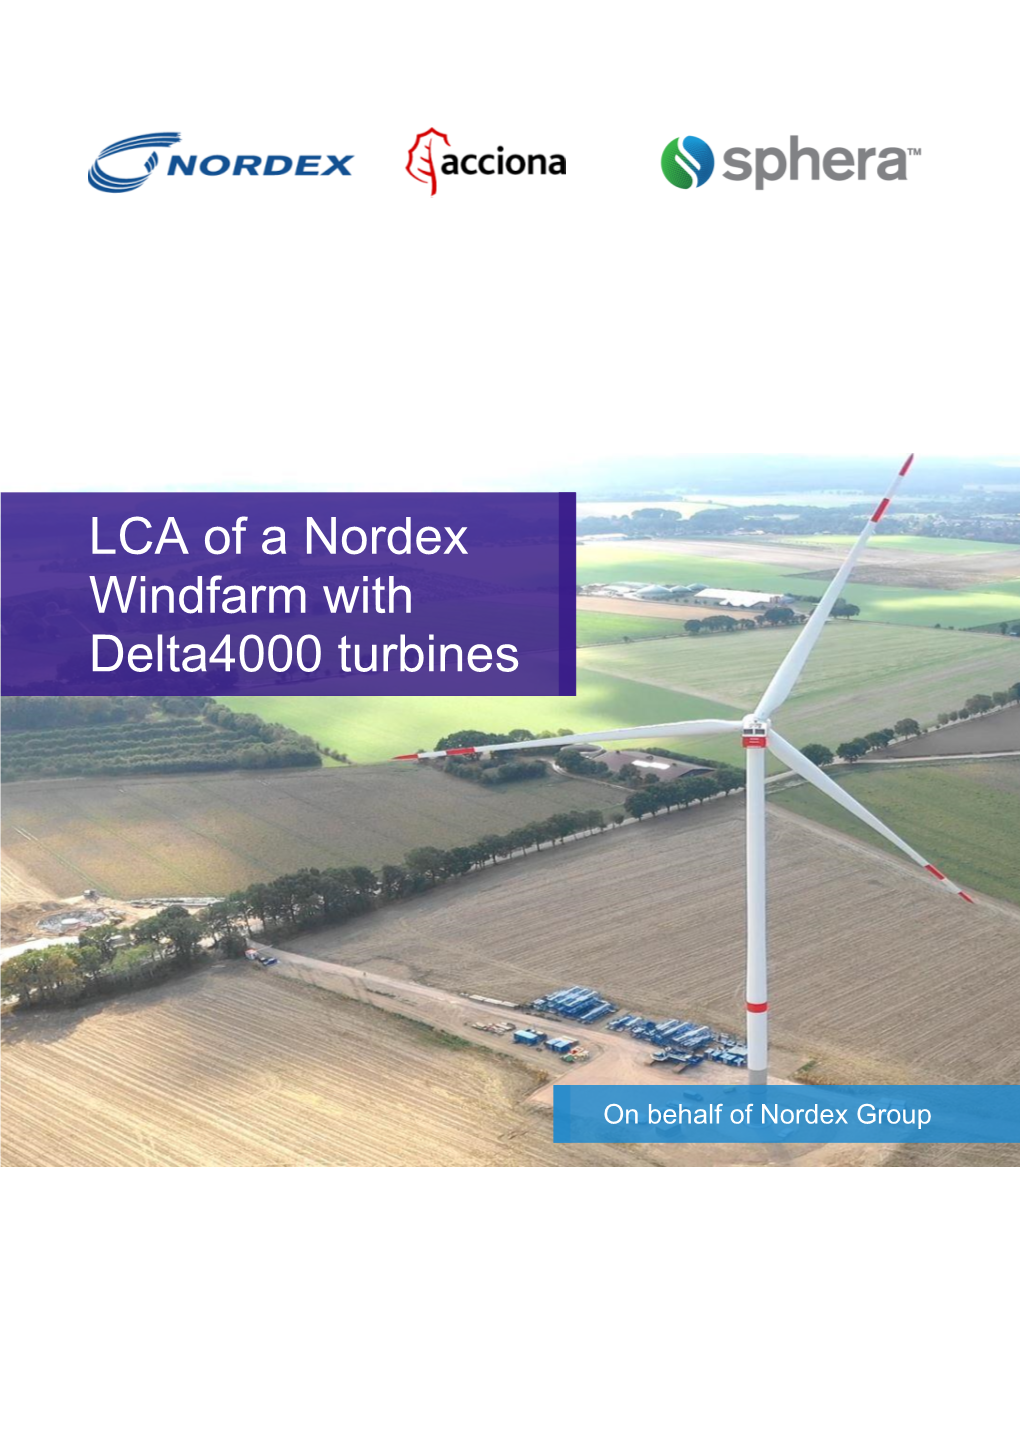 LCA of a Nordex Windfarm with Delta4000 Turbines